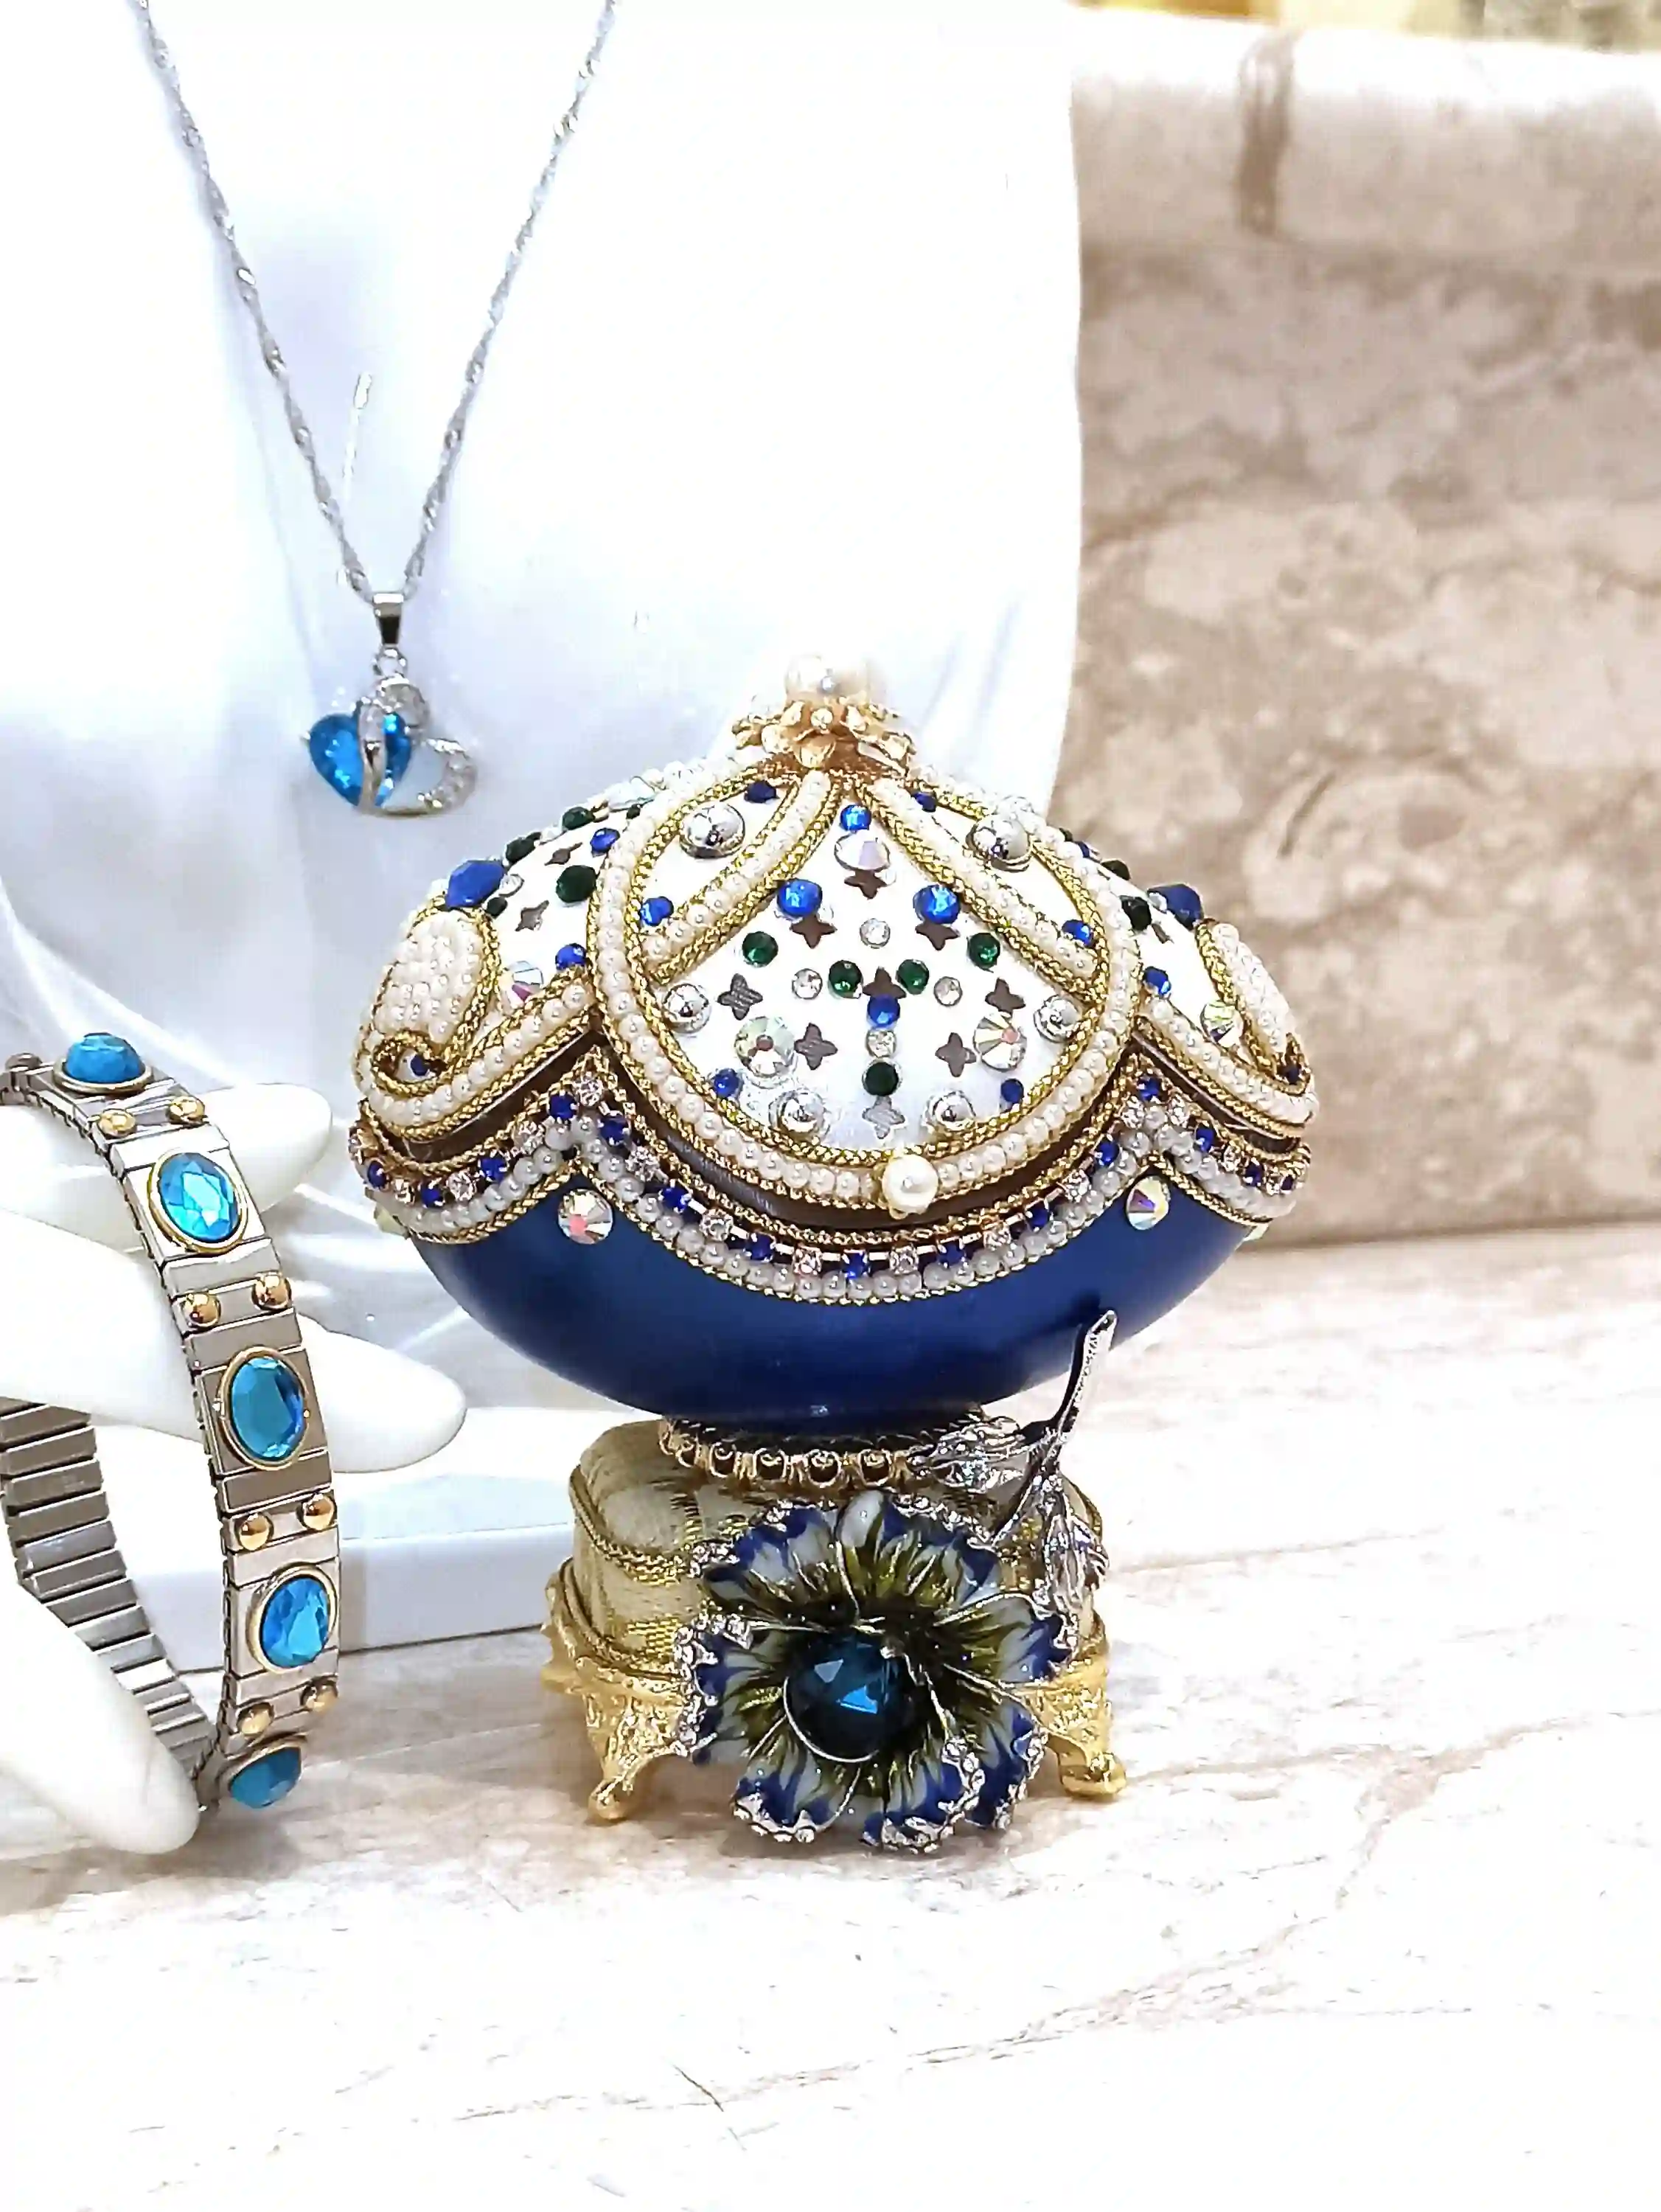 One Of a Kind- Faberge Egg -24kGOLD -Faberge Egg Music Box- Sterling Silver Jewelry - Blue NECKLACE - Silver,Topaz BRACELET - Faberge style 